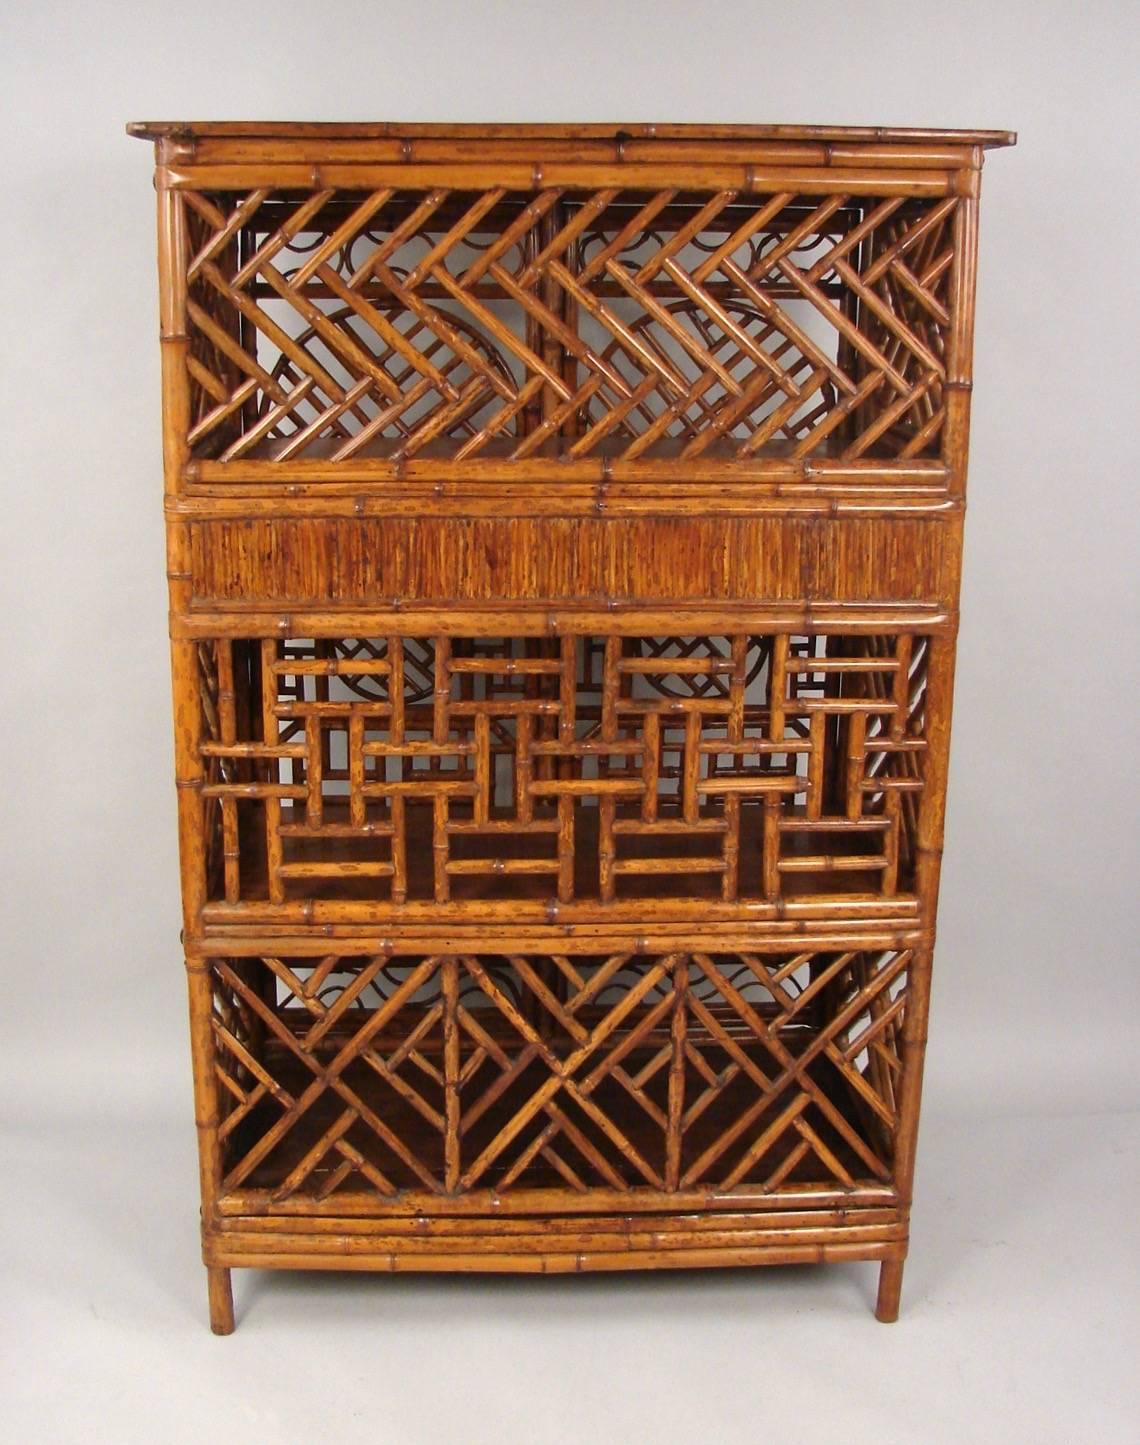 A stylish Chinese bamboo cabinet of traditional design, the two exterior doors with well-executed geometric panels opening to reveal an interior with shelves and drawers. Side and back with similar construction details as the front.